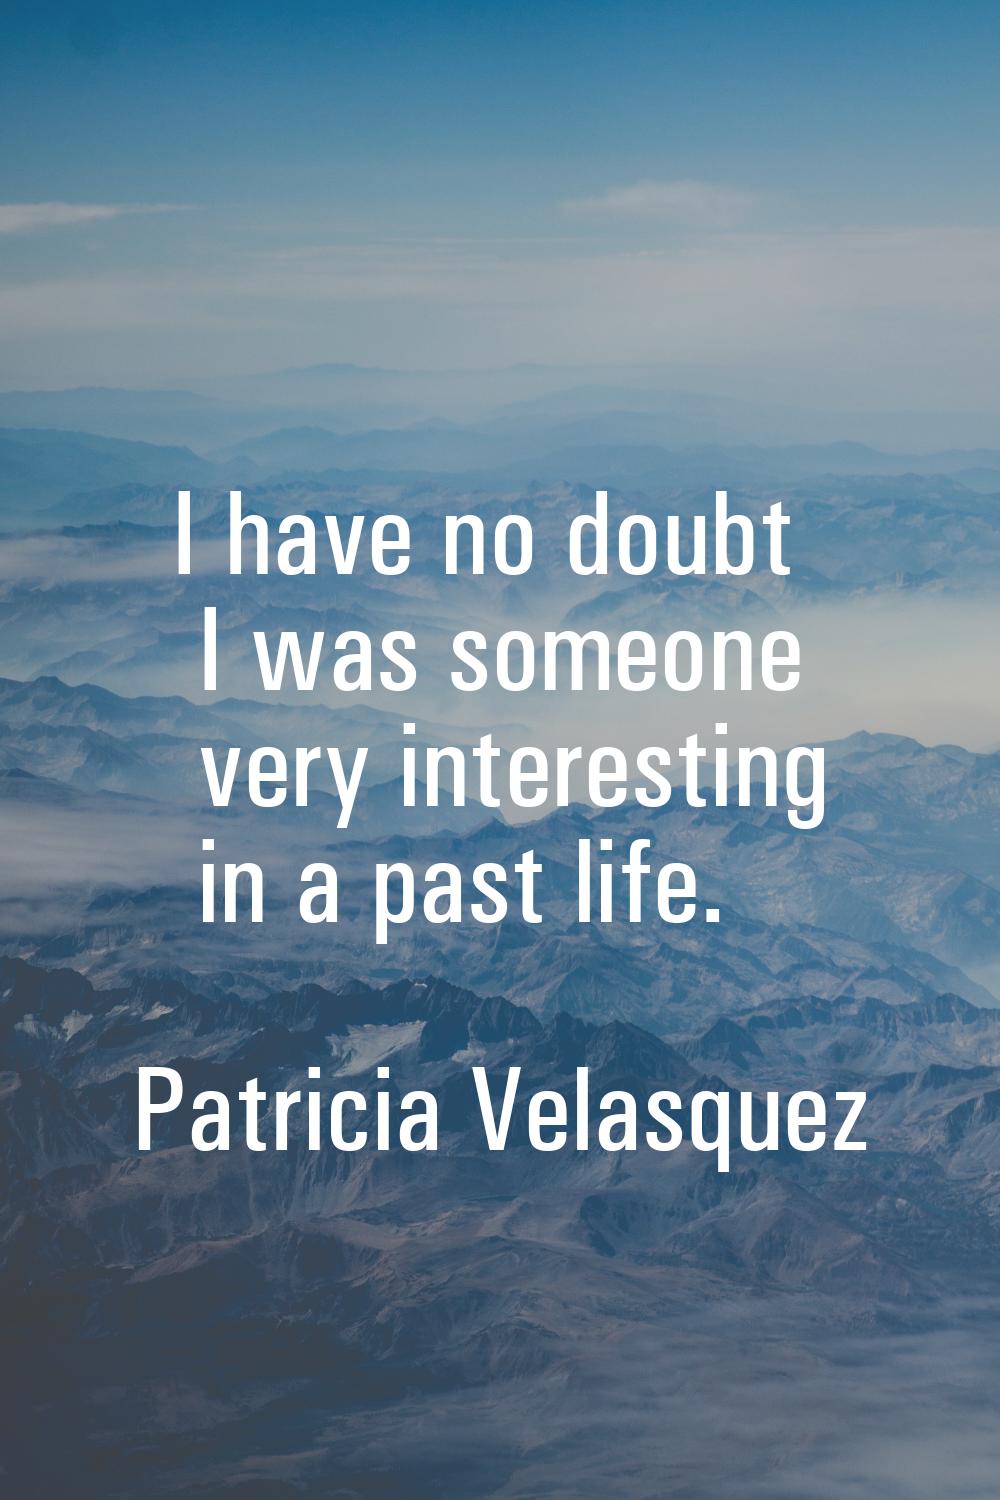 I have no doubt I was someone very interesting in a past life.